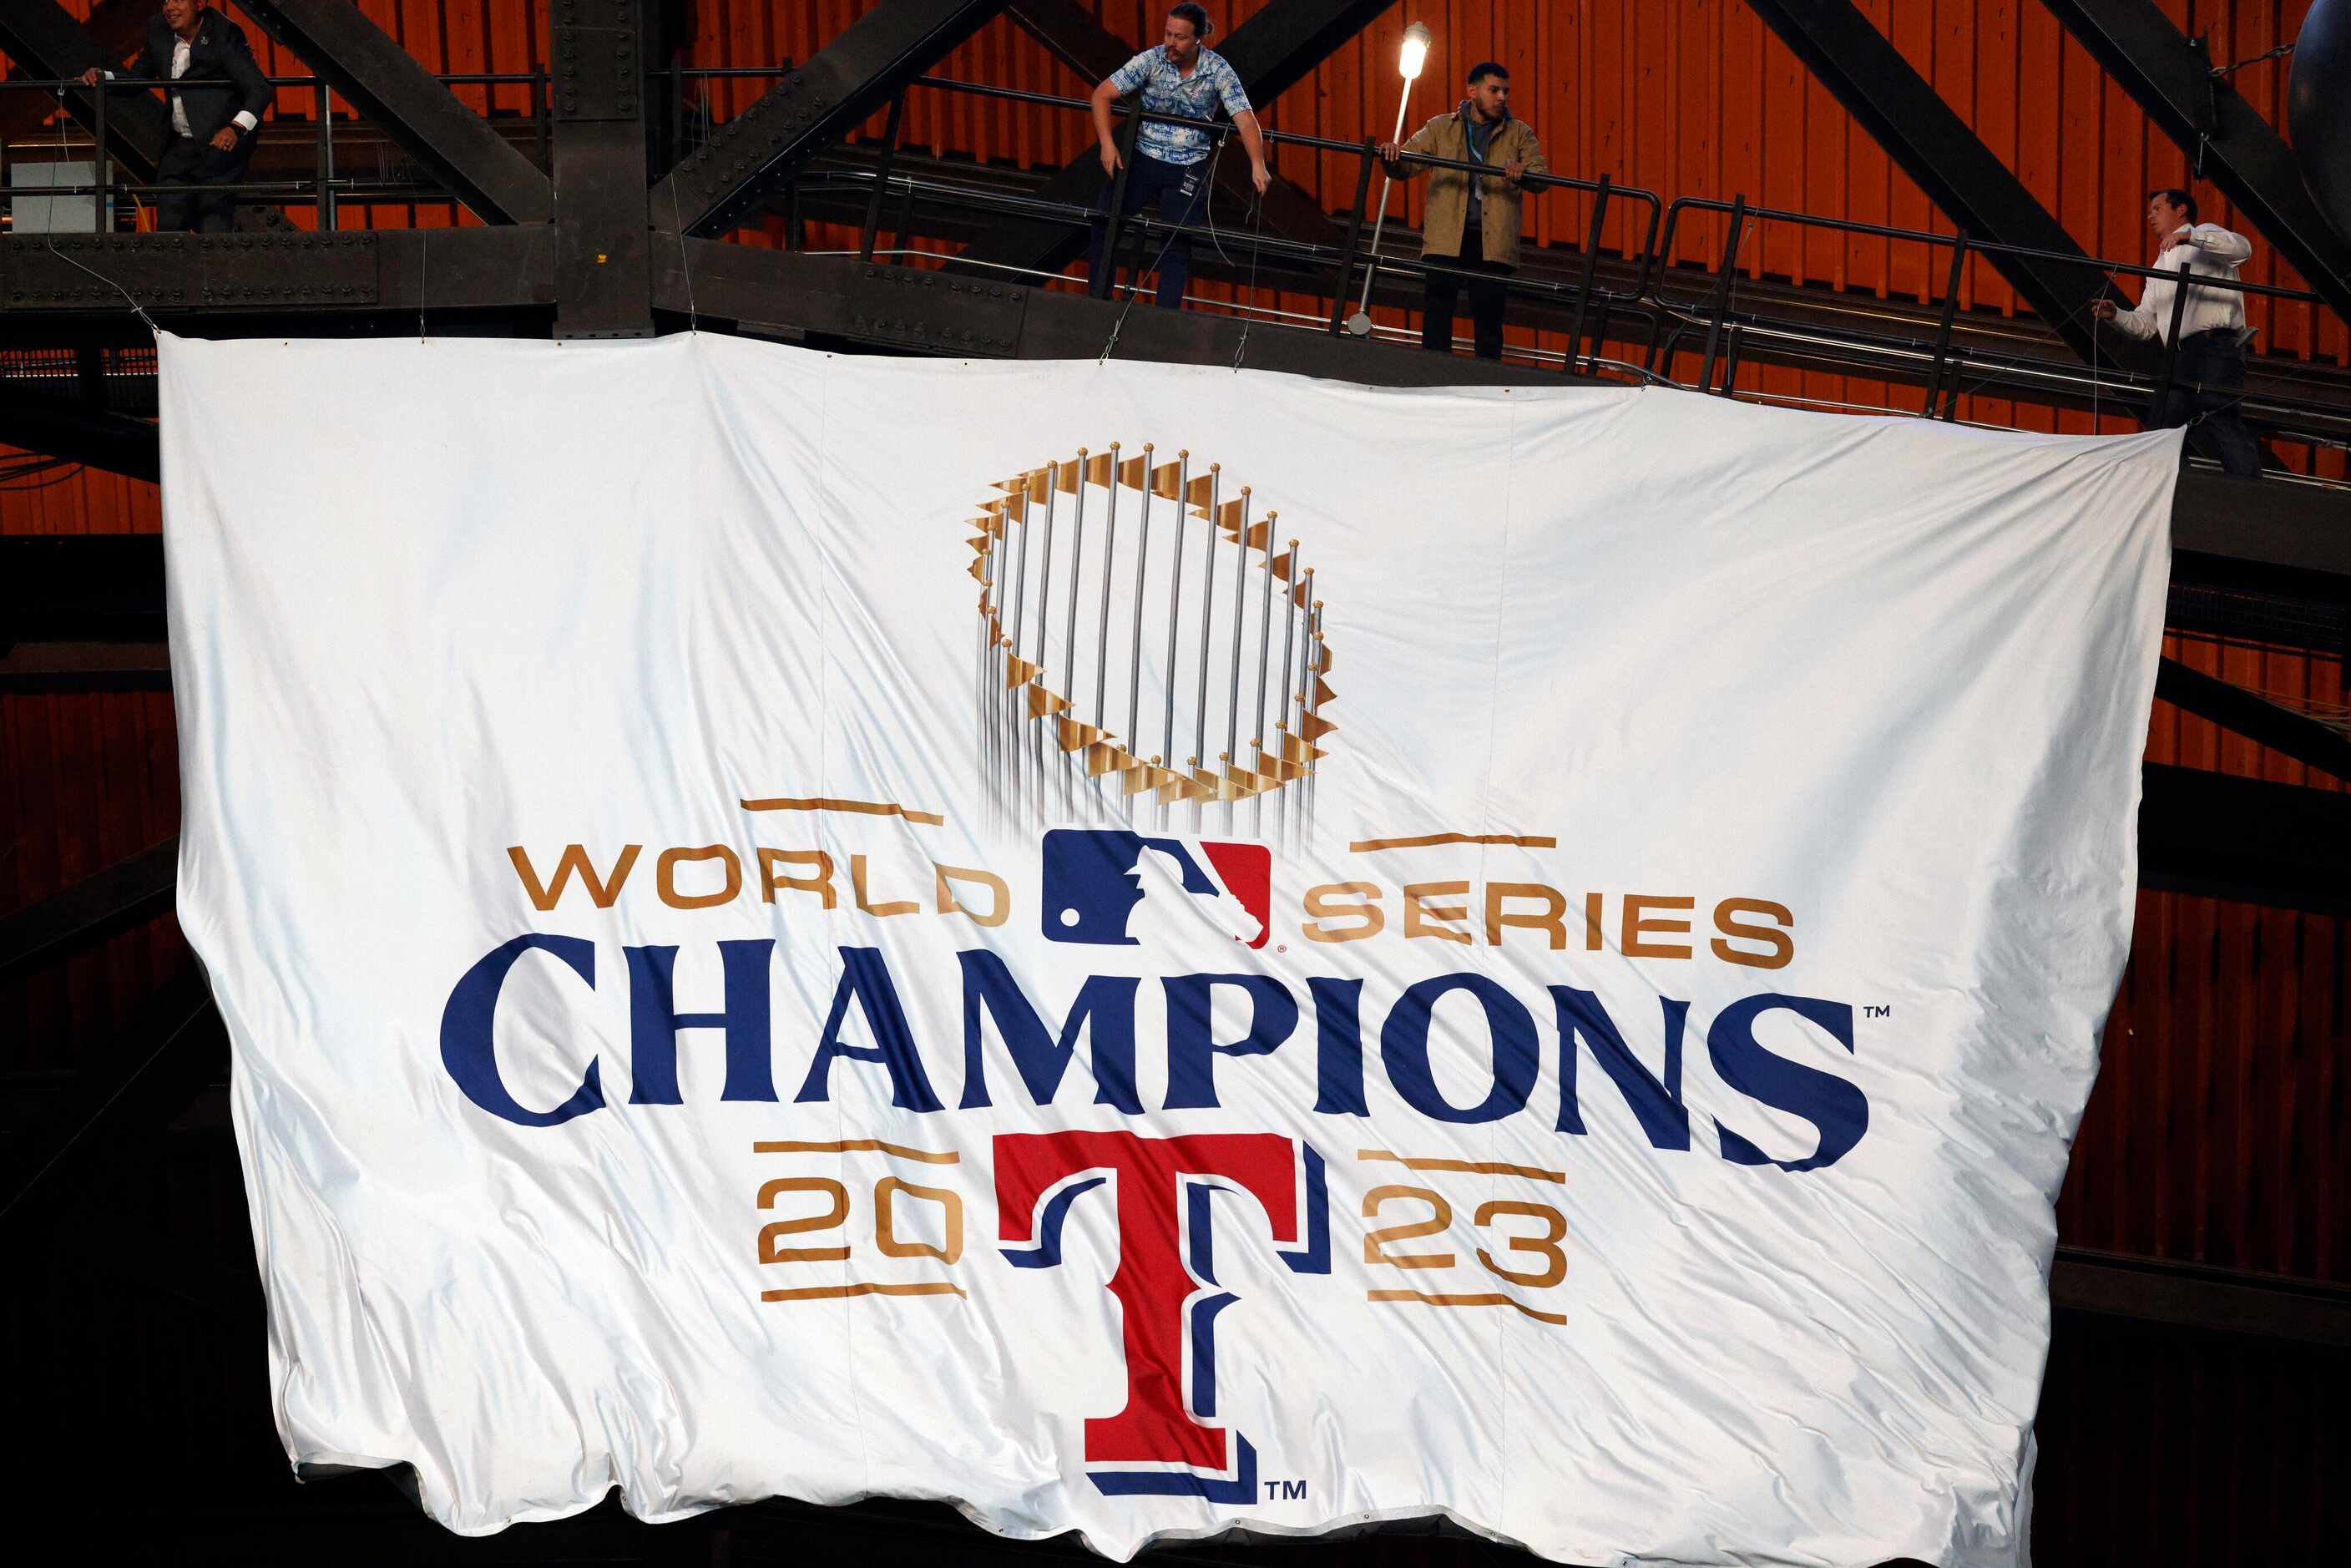 The Texas Rangers World Series championship banner is unfurled from the rafters before the...